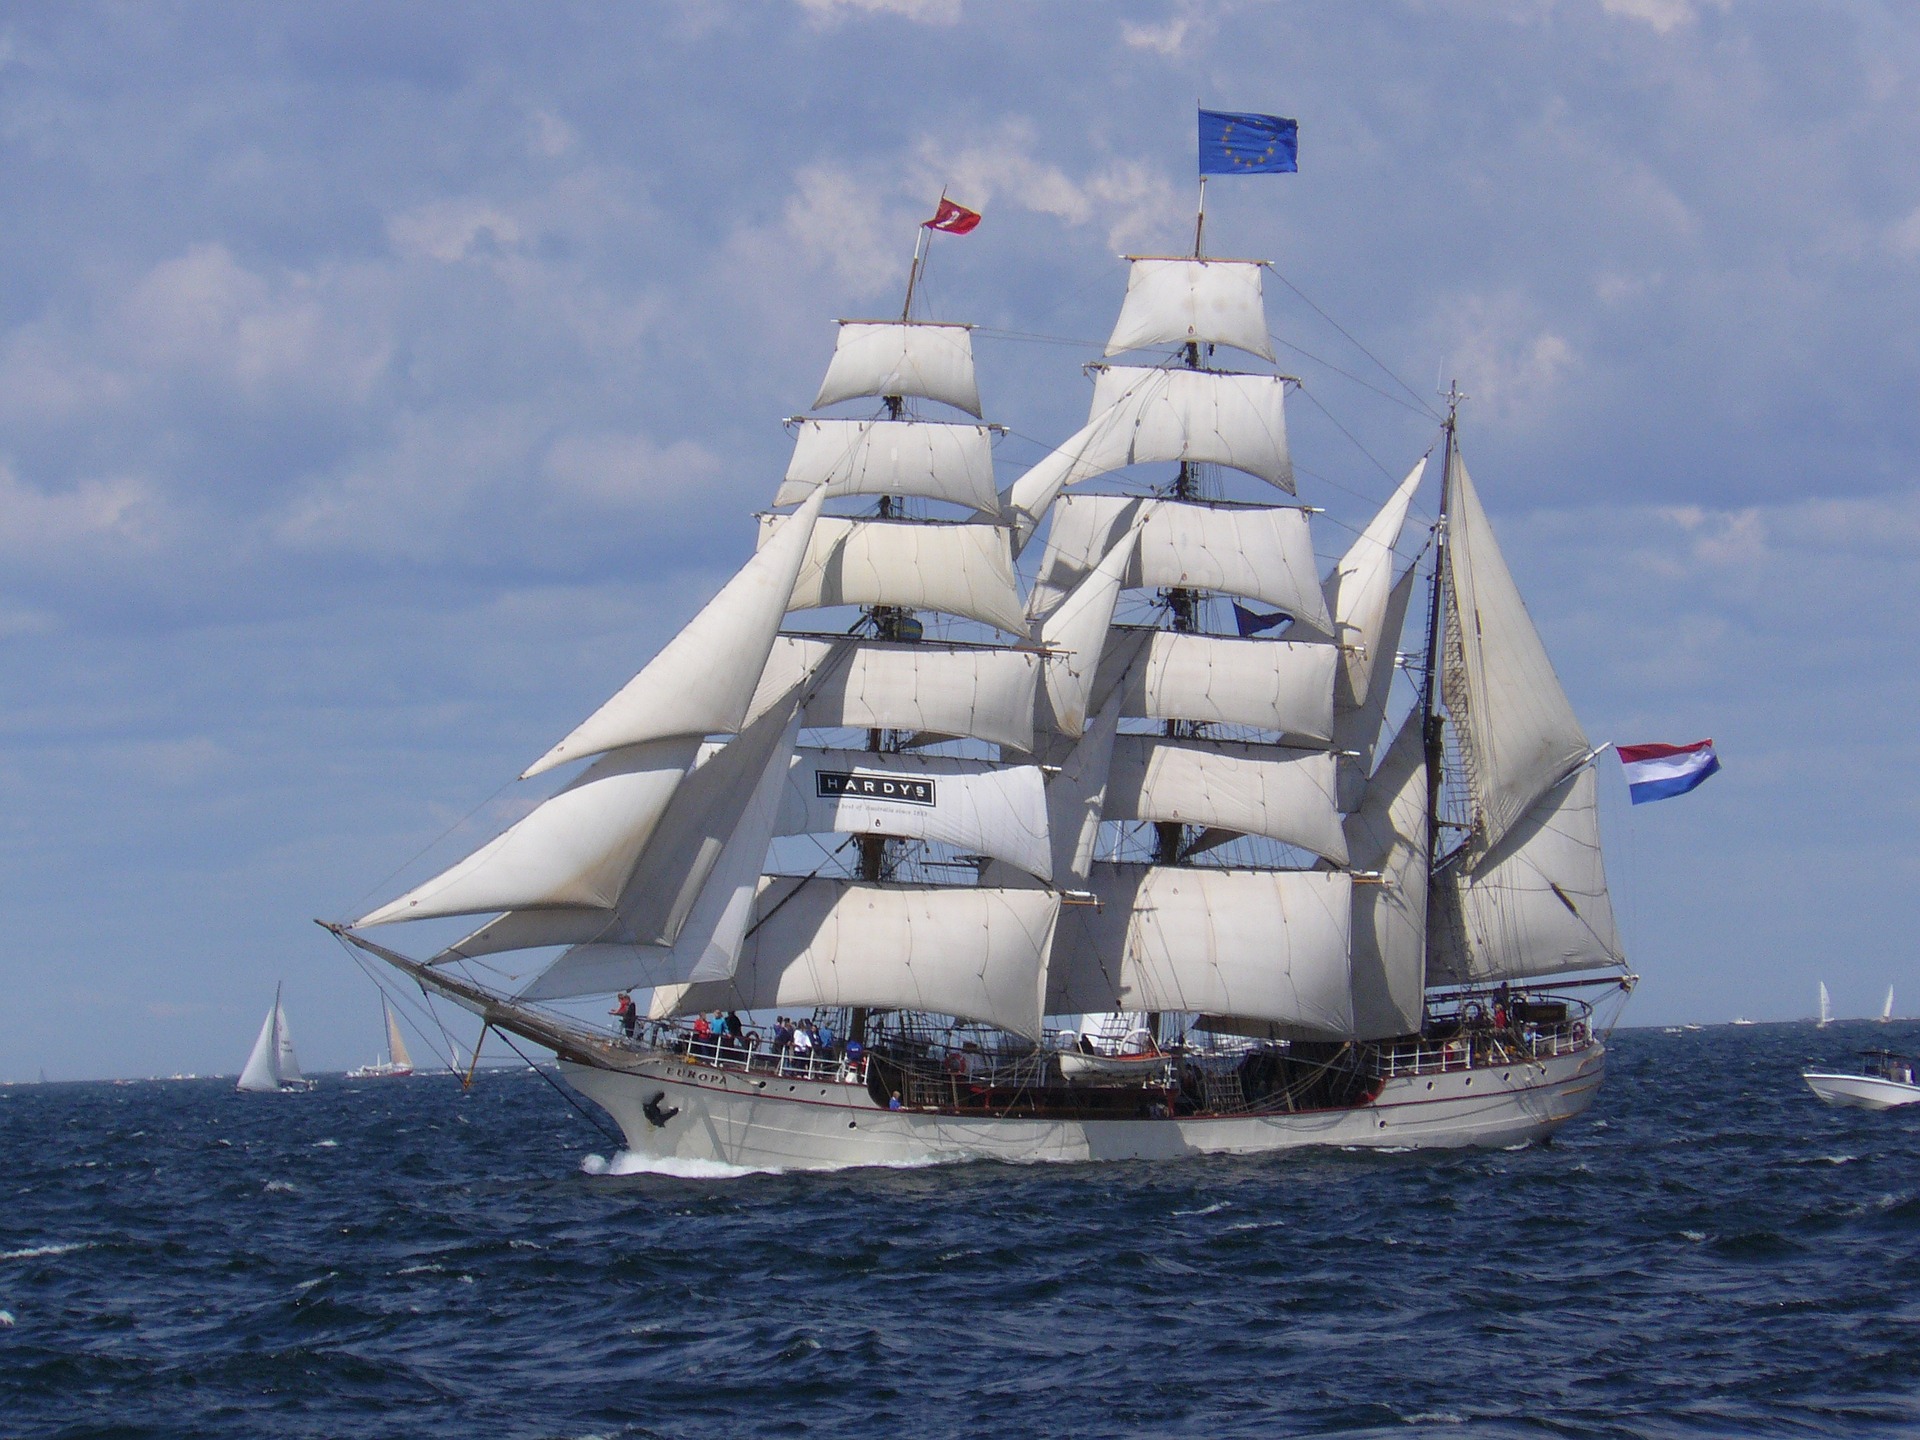 Peterson sponsors Sail Den Helder – Tall ship races in The Netherlands